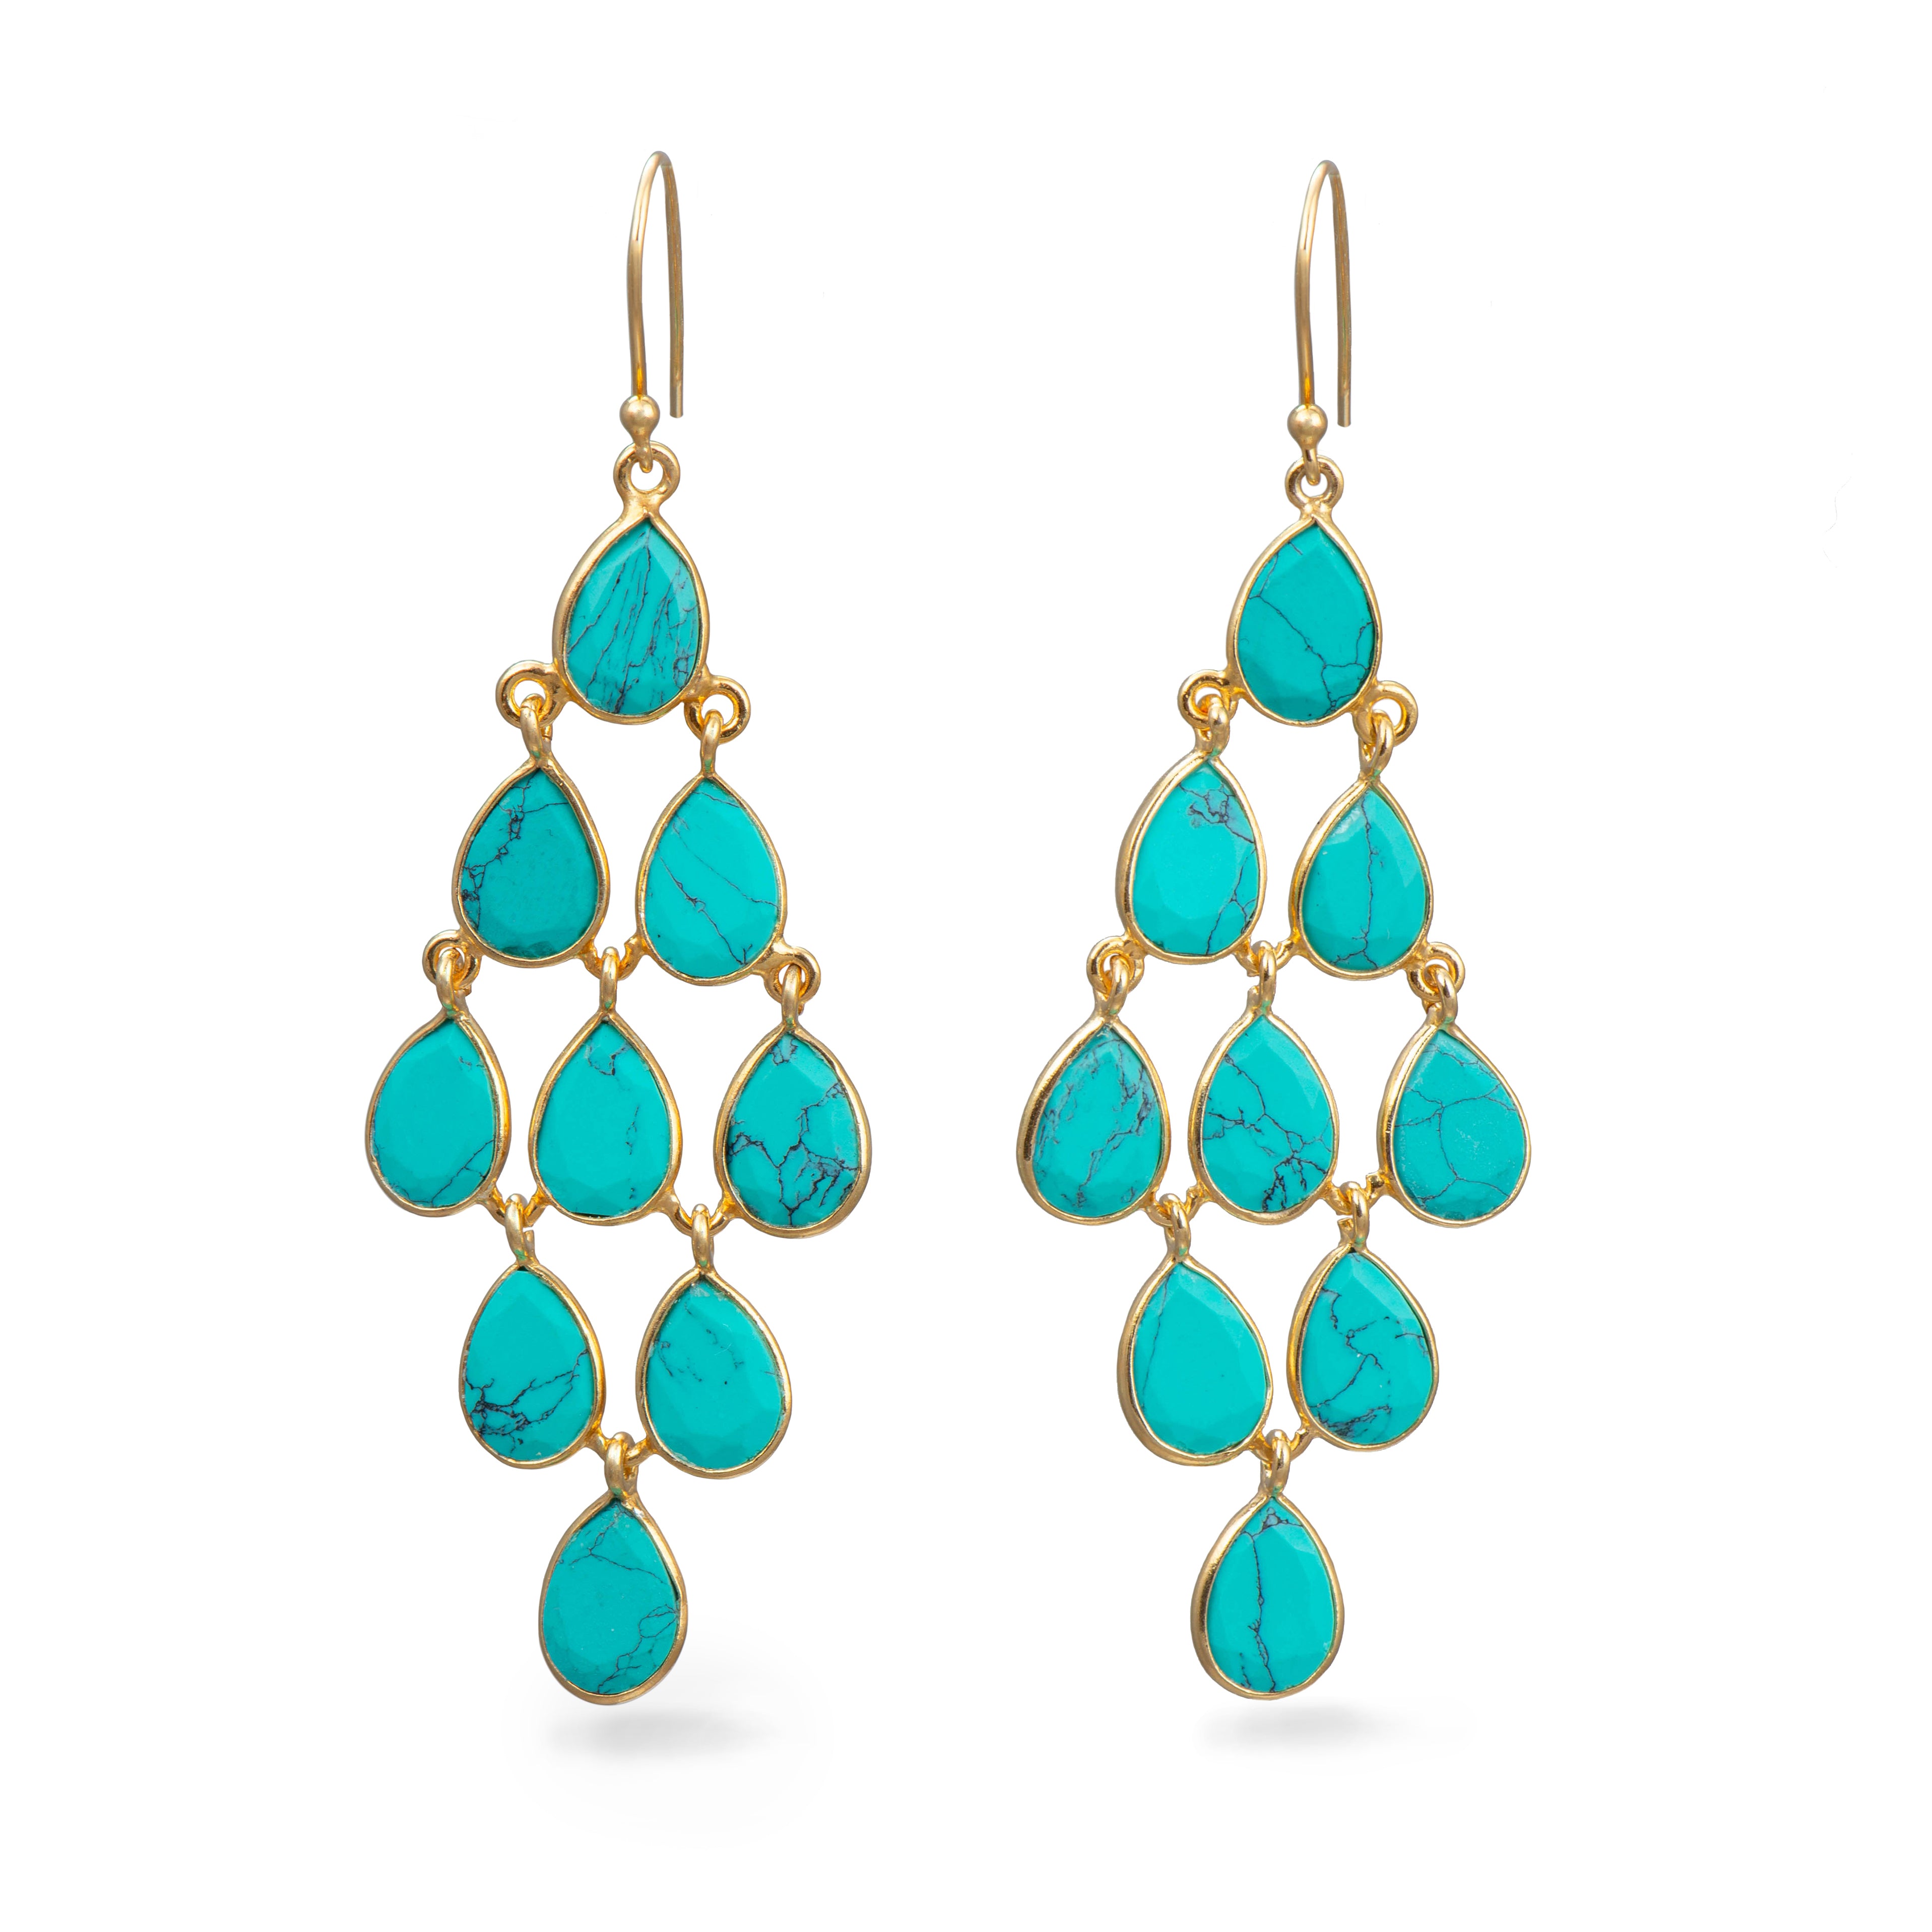 Gold Plated Sterling Silver Chandelier Earrings with Natural Gemstones - Turquoise